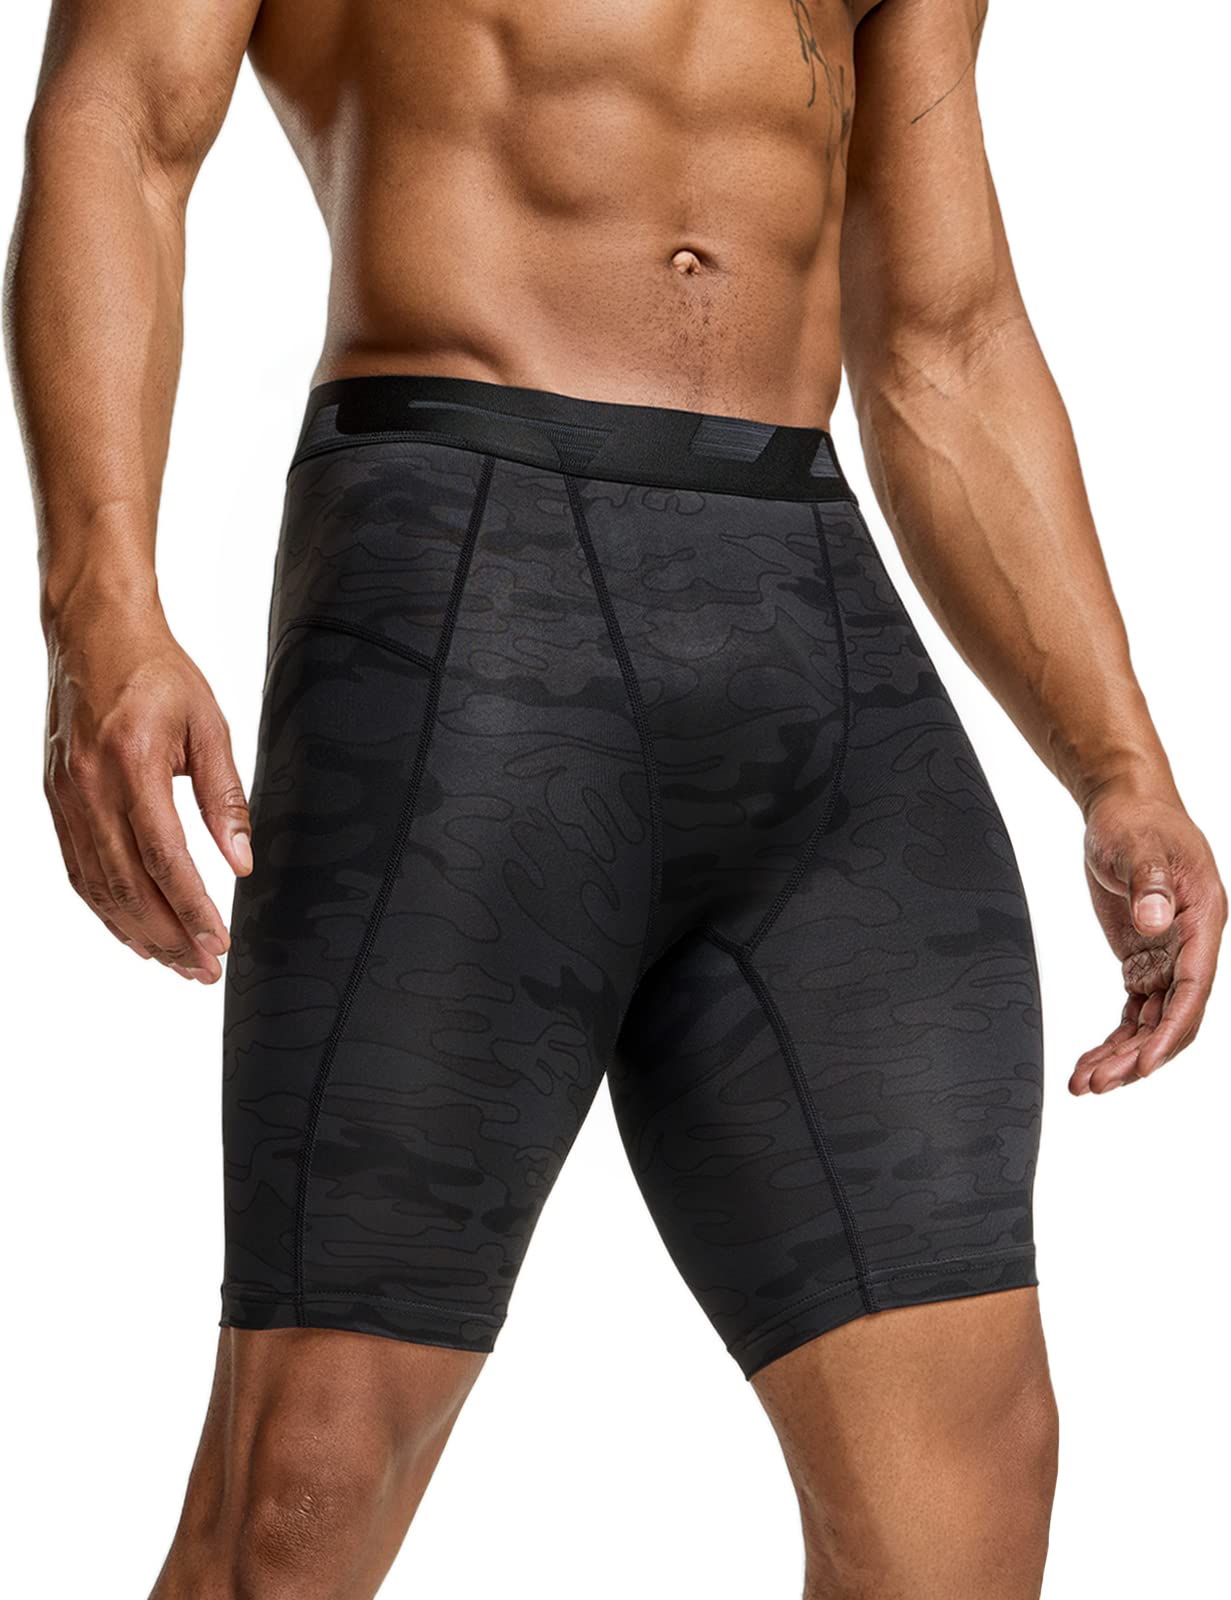 TSLA Men's Athletic Compression Shorts, Sports Performance Active Cool Dry Running Tights